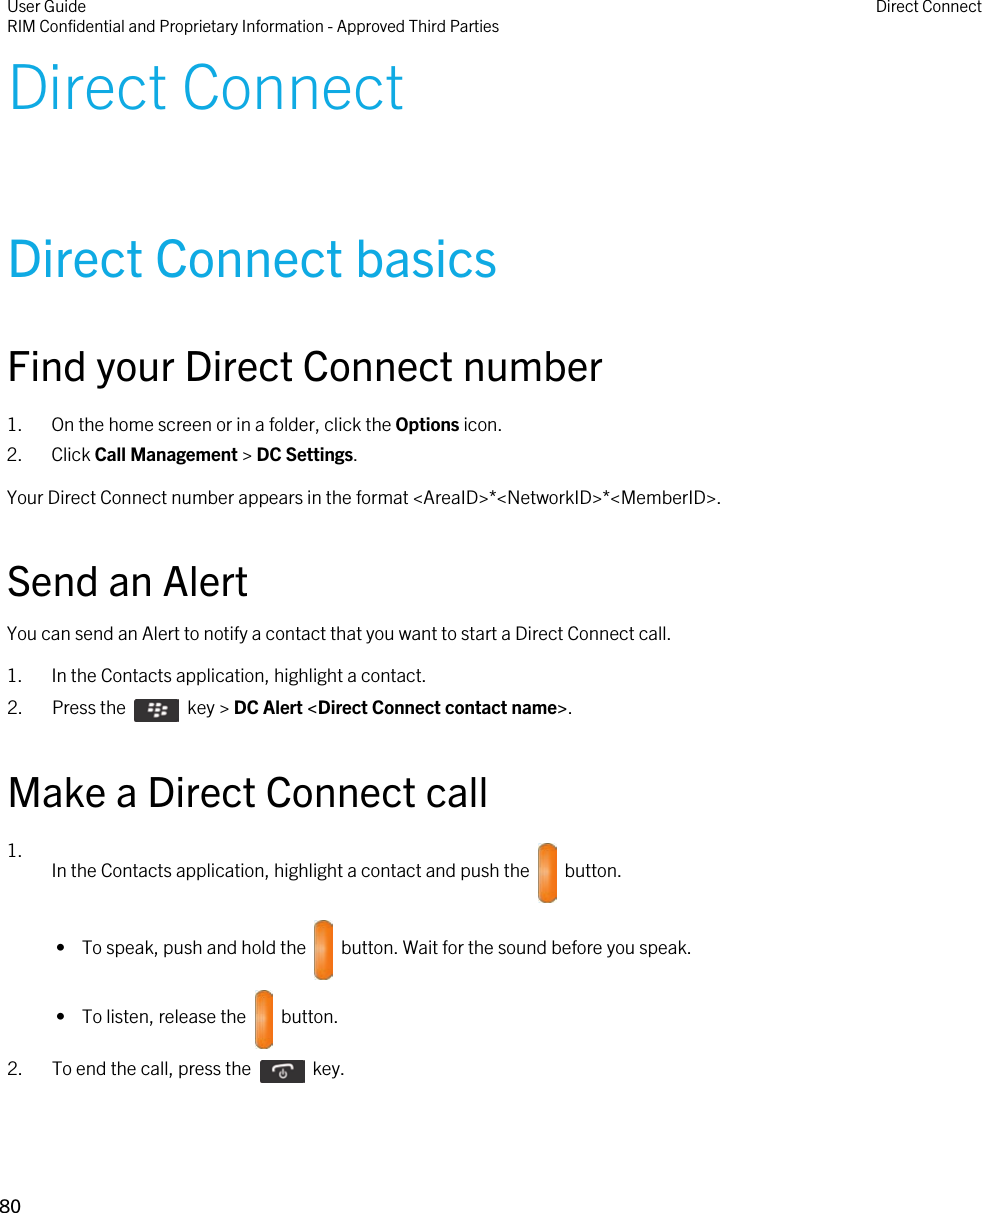 Direct ConnectDirect Connect basicsFind your Direct Connect number1. On the home screen or in a folder, click the Options icon.2. Click Call Management &gt; DC Settings.Your Direct Connect number appears in the format &lt;AreaID&gt;*&lt;NetworkID&gt;*&lt;MemberID&gt;.Send an AlertYou can send an Alert to notify a contact that you want to start a Direct Connect call.1. In the Contacts application, highlight a contact.2.  Press the    key &gt; DC Alert &lt;Direct Connect contact name&gt;.Make a Direct Connect call1. In the Contacts application, highlight a contact and push the    button. •  To speak, push and hold the    button. Wait for the sound before you speak. •  To listen, release the    button.2.  To end the call, press the    key.User GuideRIM Confidential and Proprietary Information - Approved Third Parties Direct Connect80 